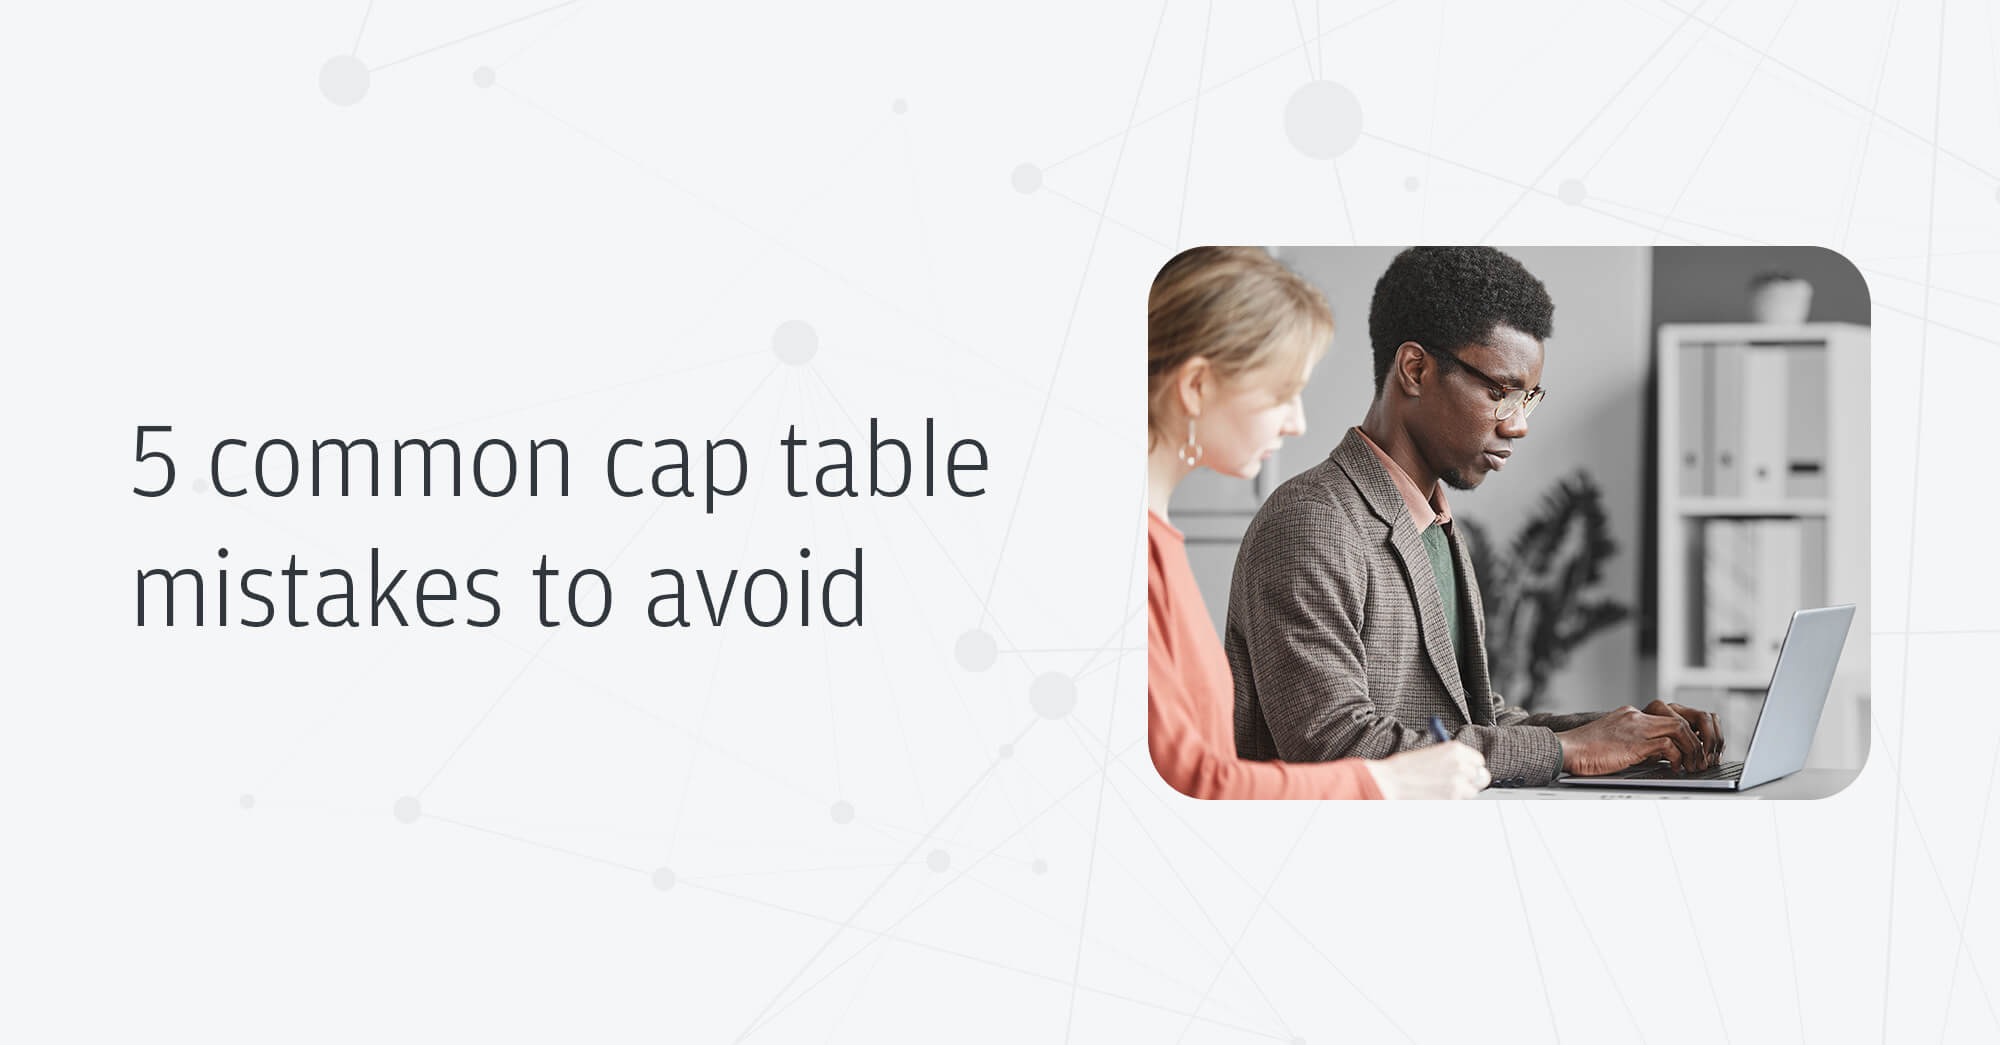 Cap table – 5 Common cap table mistakes to avoid